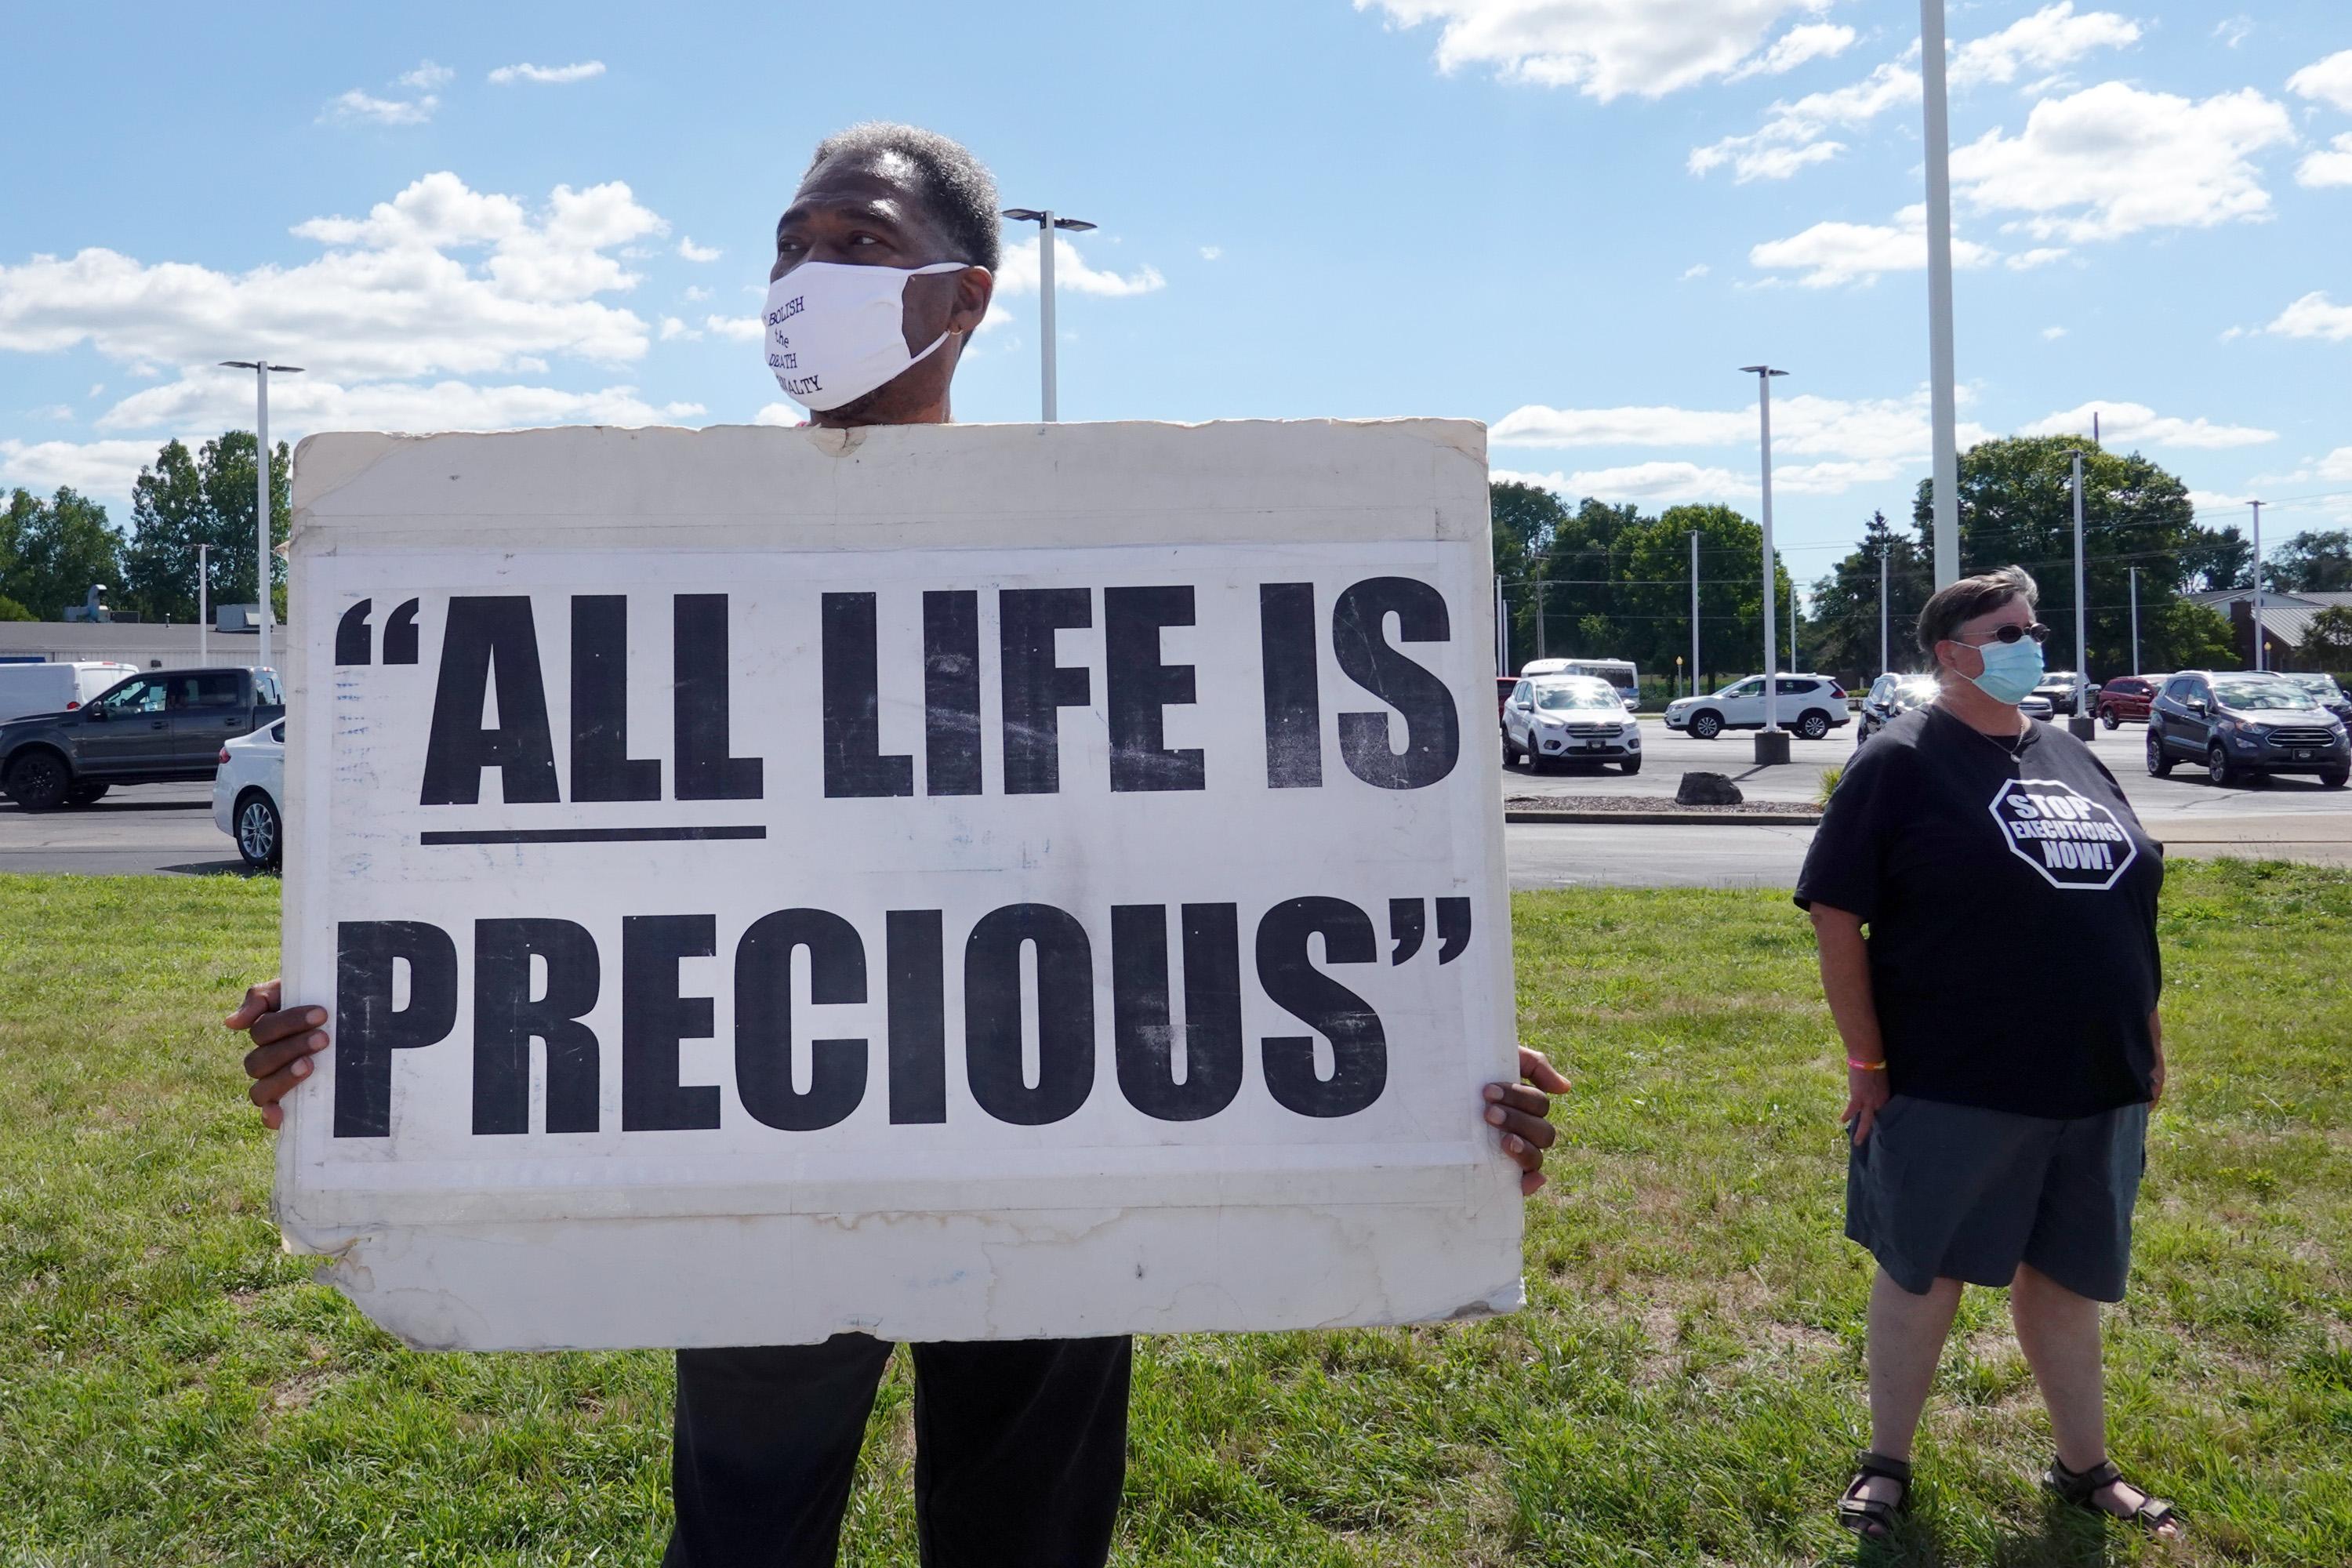 Man holds up sign that says "ALL LIFE IS PRECIOUS."